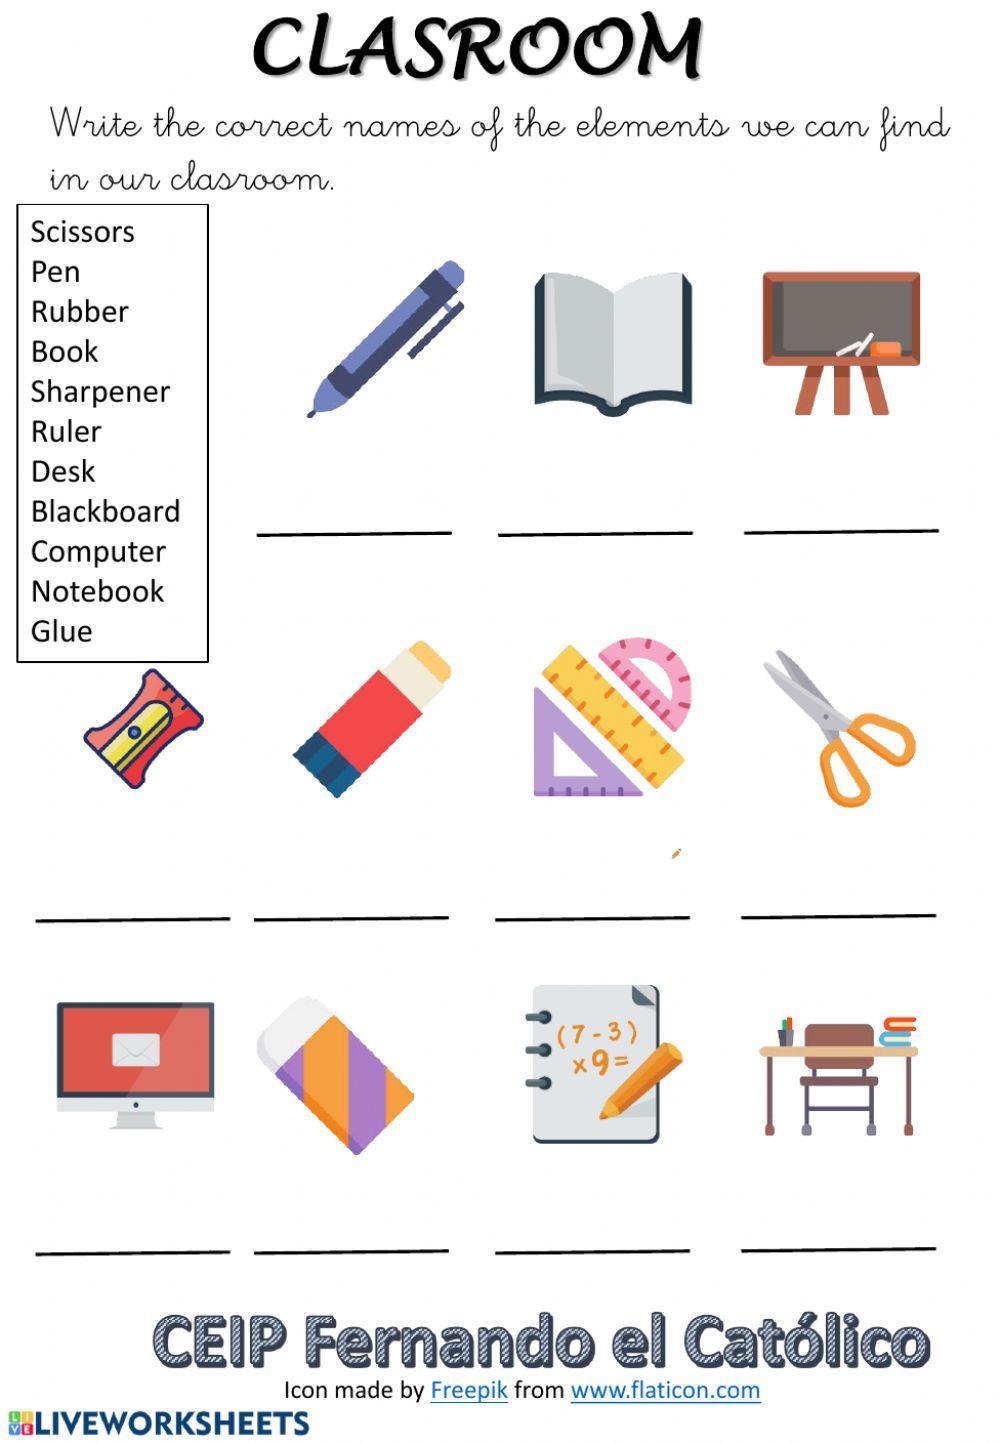 Clasroom objects